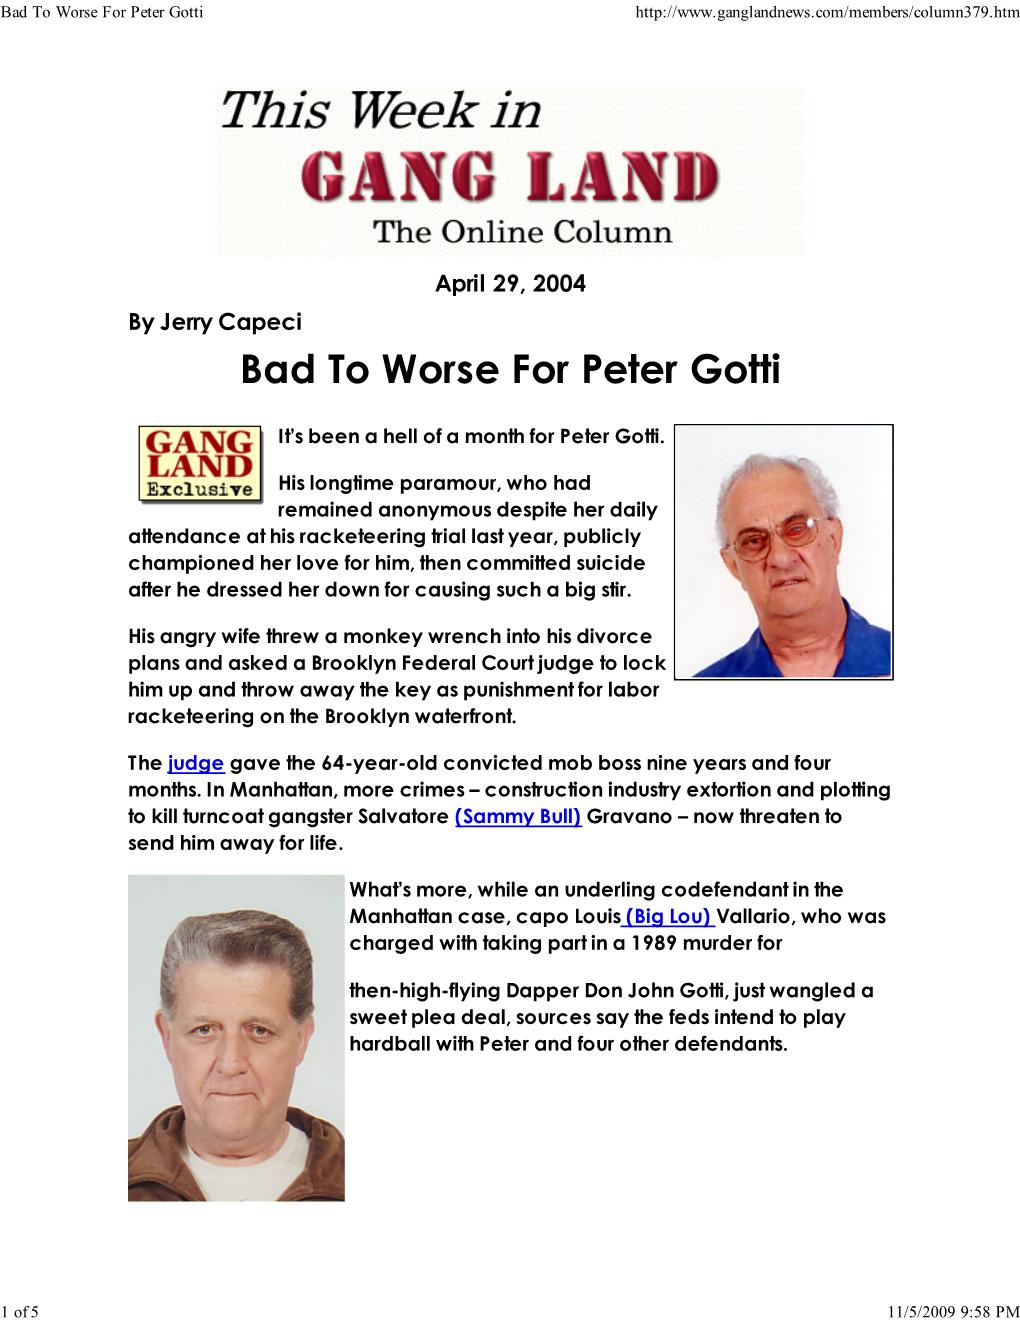 Bad to Worse for Peter Gotti